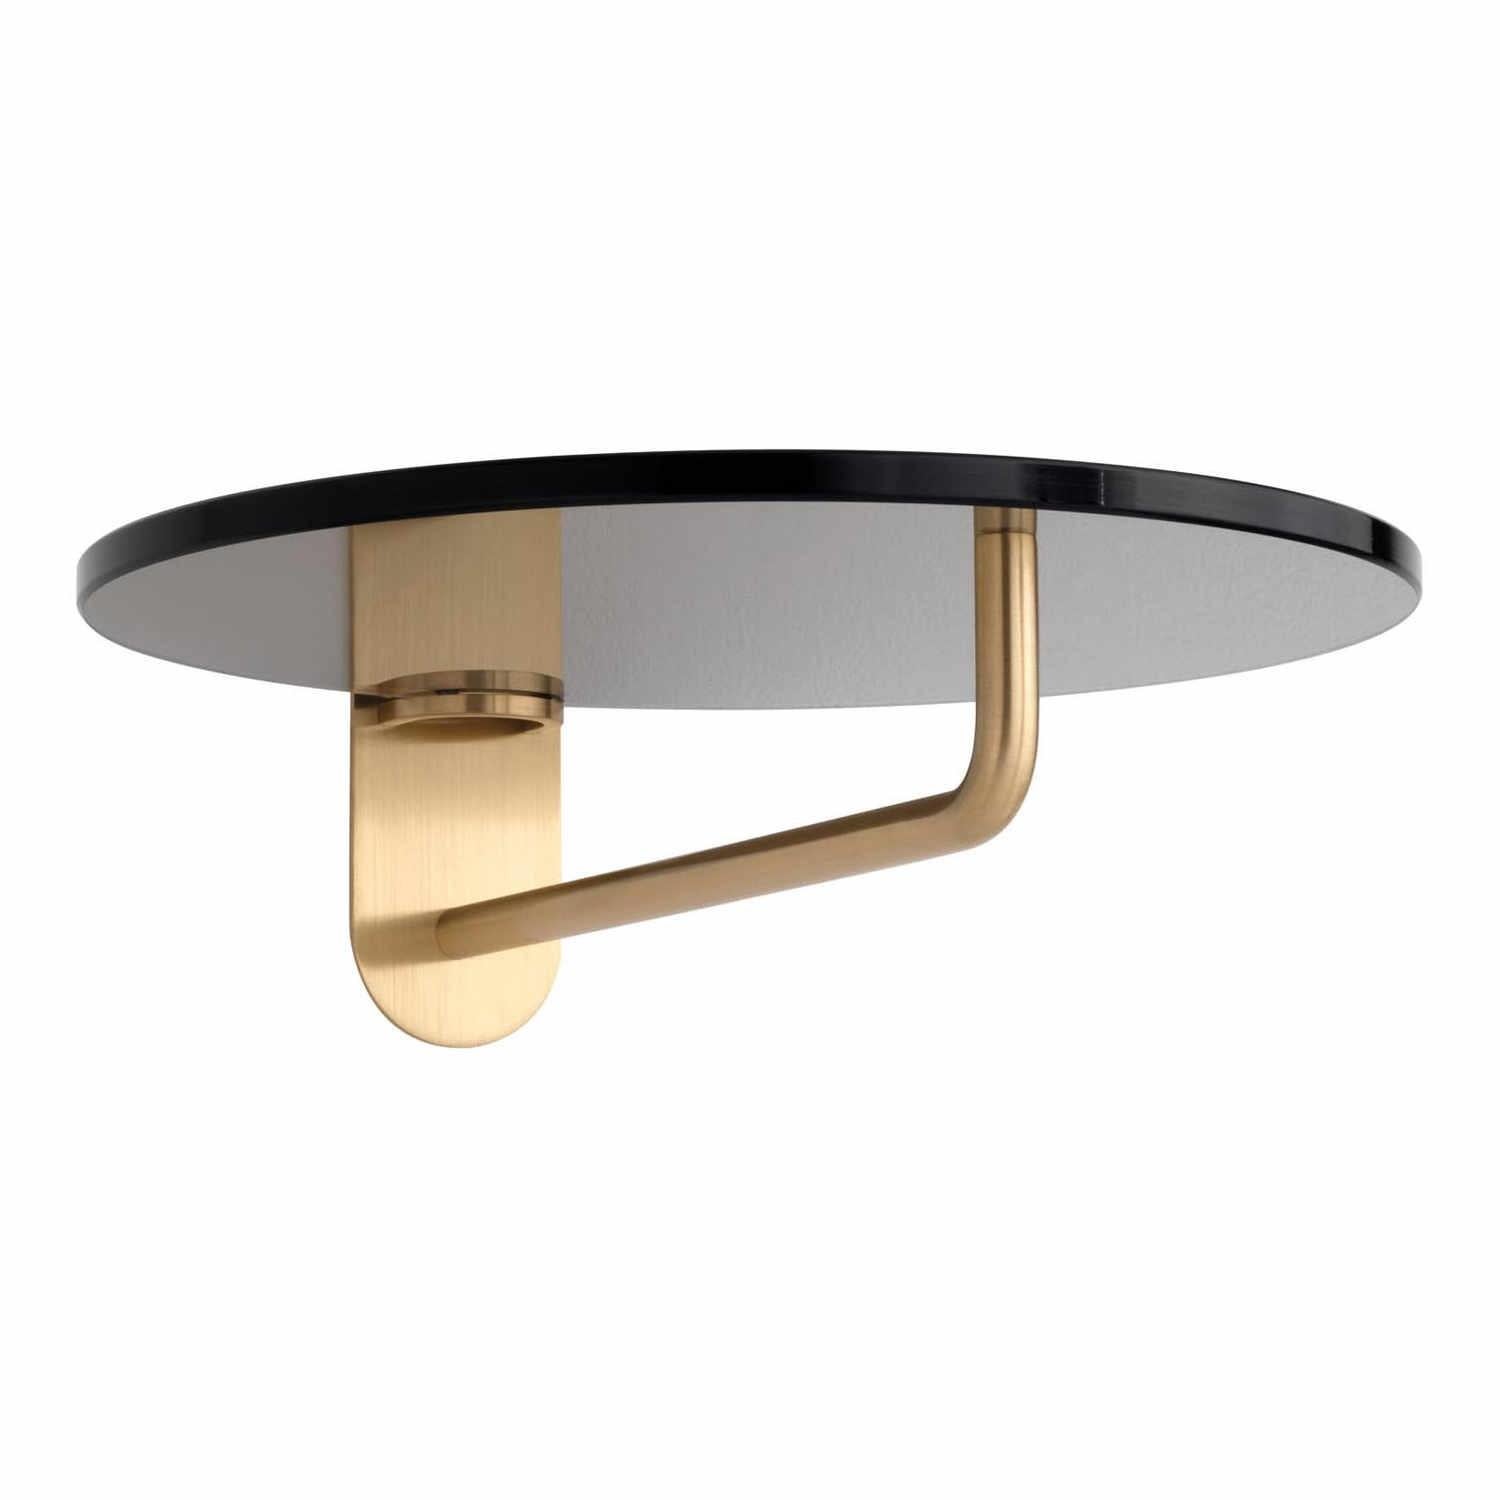 Wall-mounted coat rack with circular glass top
glass 12mm thick, and 1 hanging rail, clear with polished chrome fittings or smoked glass with matt solid brass fittings.

Contemporary yet classic, the FRISBI wall hook combines clear functionality